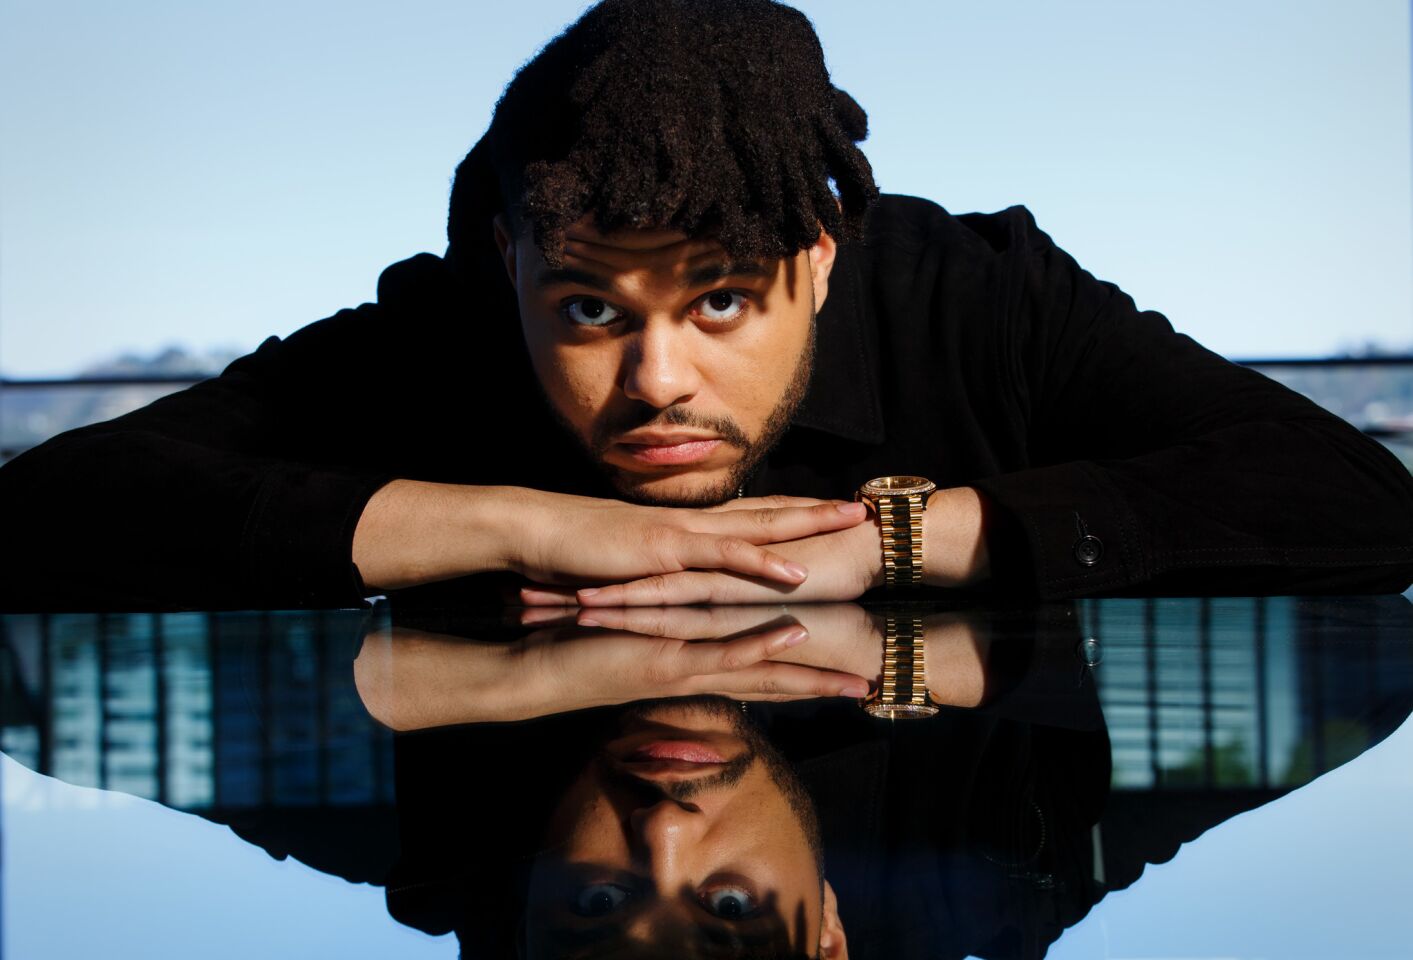 Celebrity portraits by The Times | The Weeknd